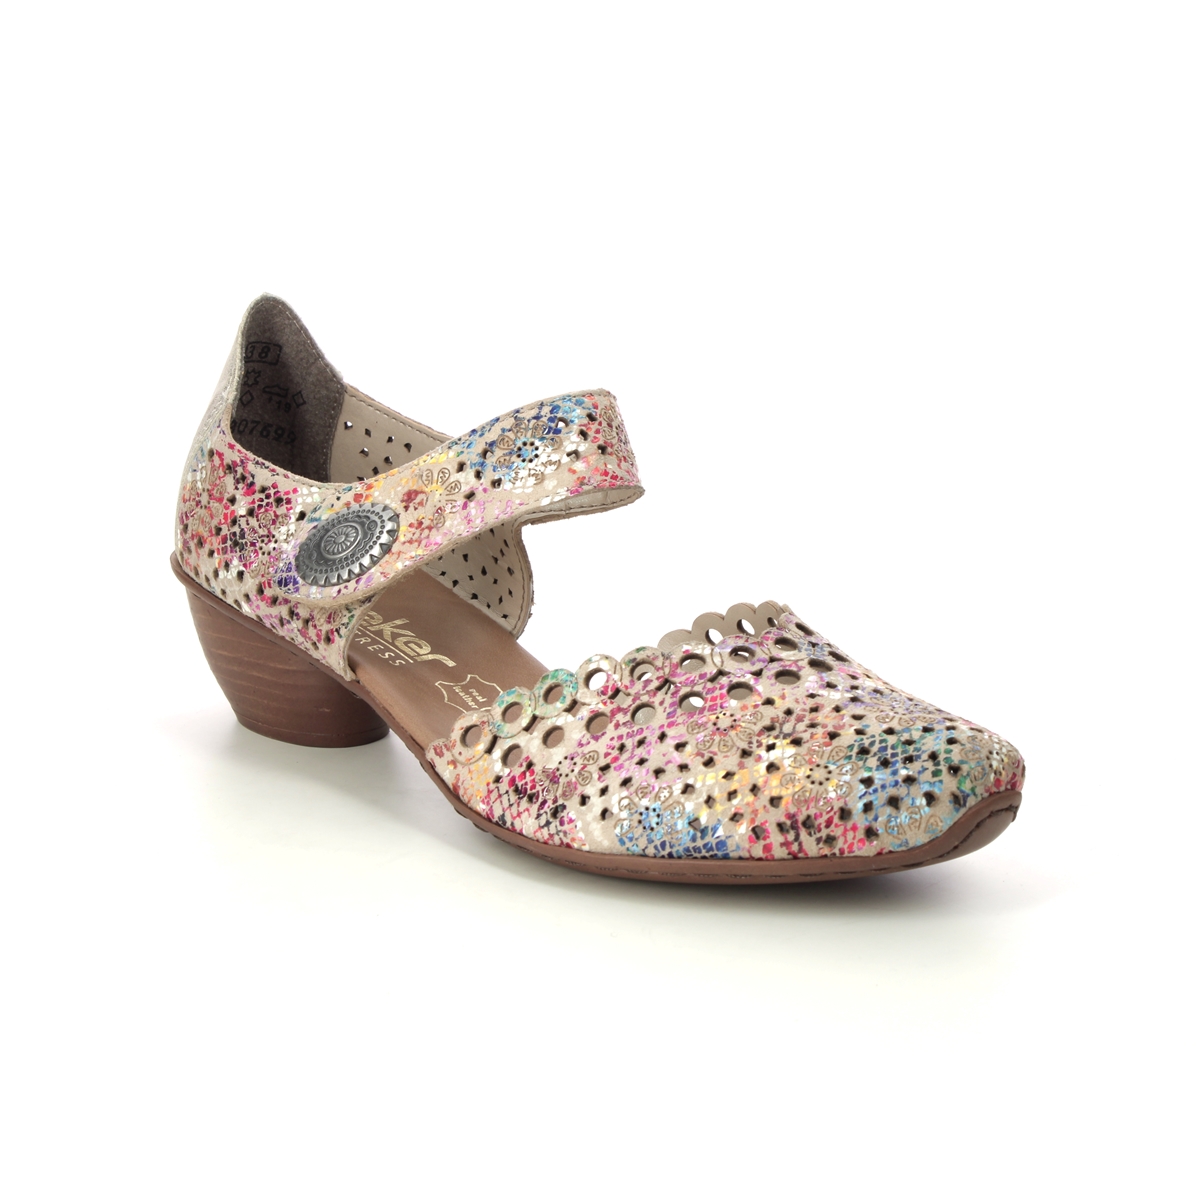 Rieker 43753-91 Pink Floral Womens Comfort Slip On Shoes in a Plain Leather in Size 40